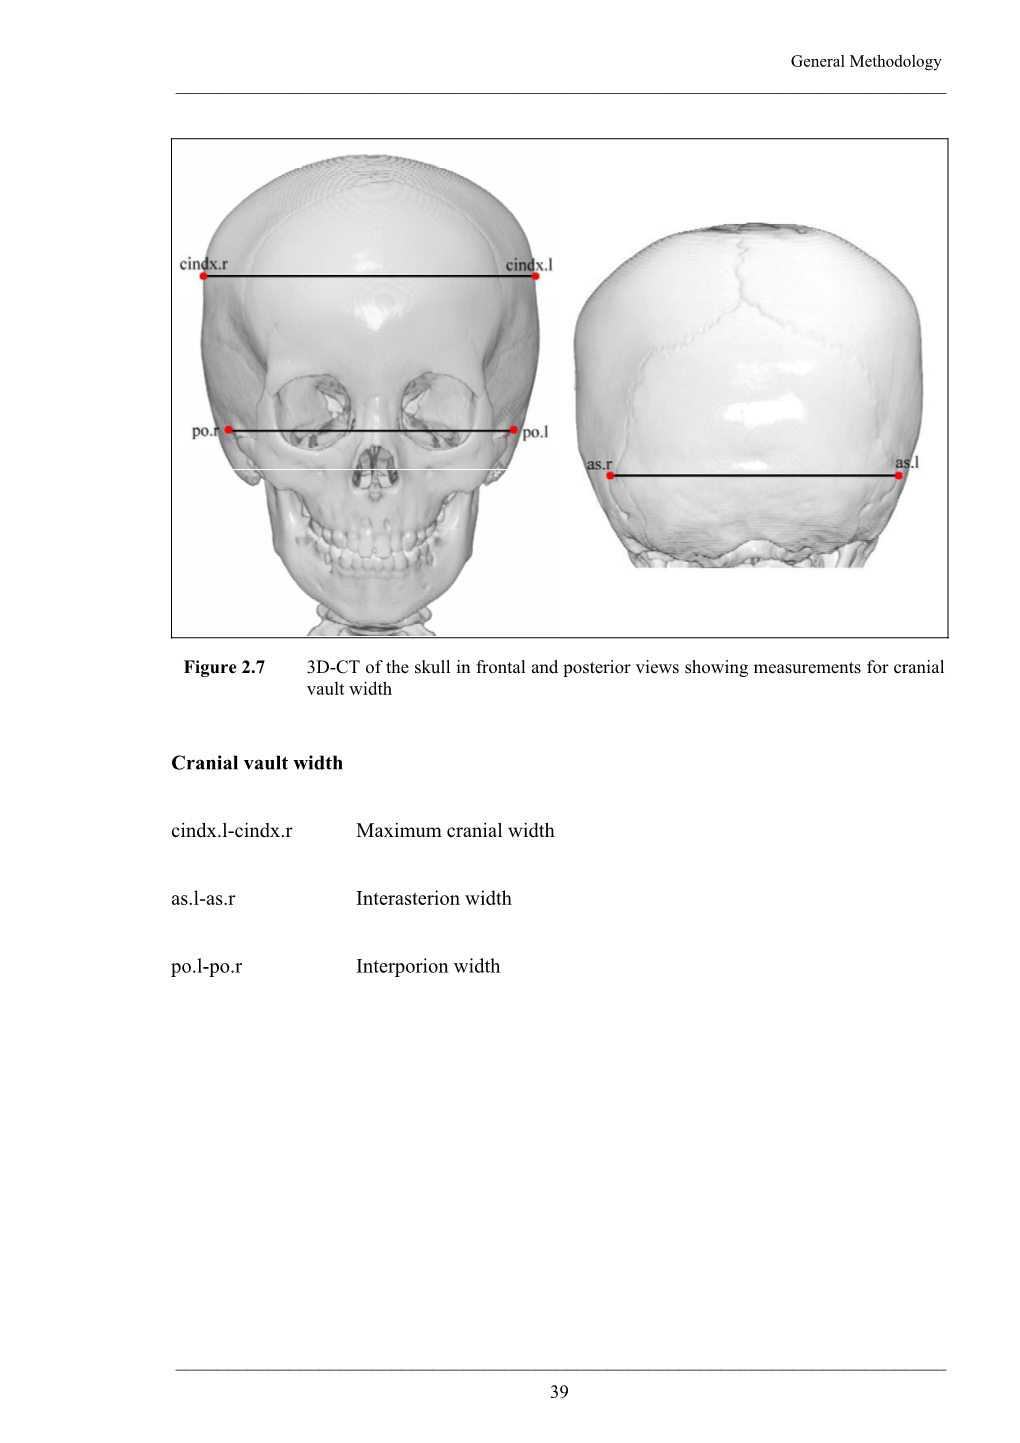 Figure 2.7 3D-CT of the Skull in Frontal and Posterior Views Showing Measurements for Cranial Vault Width